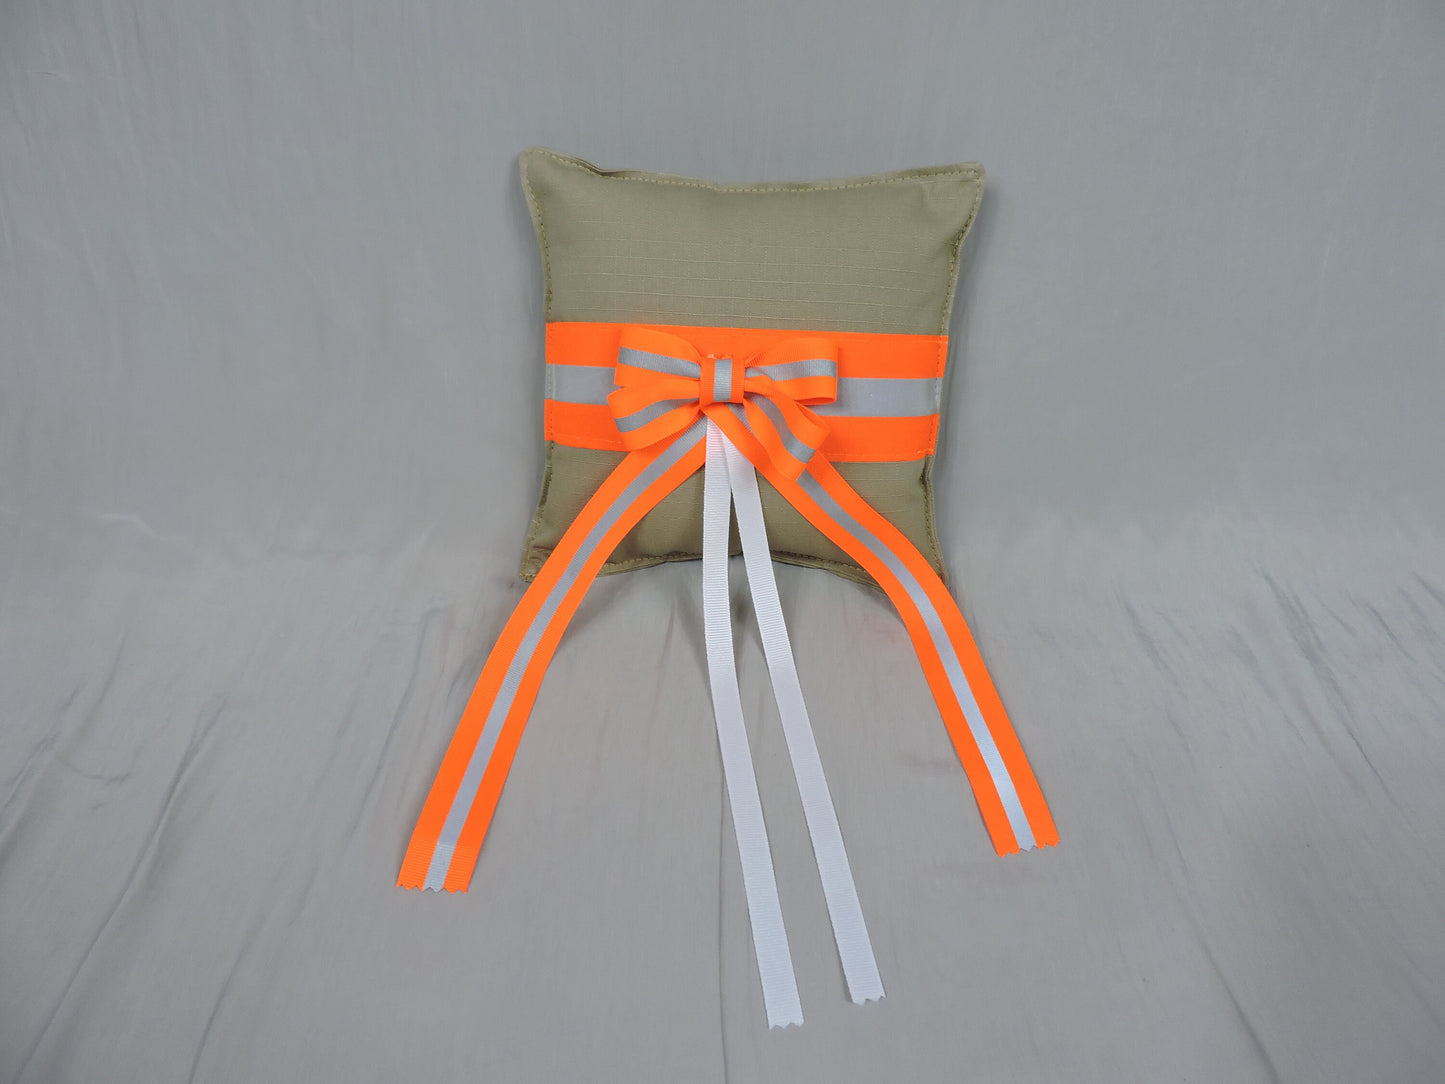 Tan Fabric and Neon Orange Reflective Tape Firefighter wedding Ring Bearer Pillow